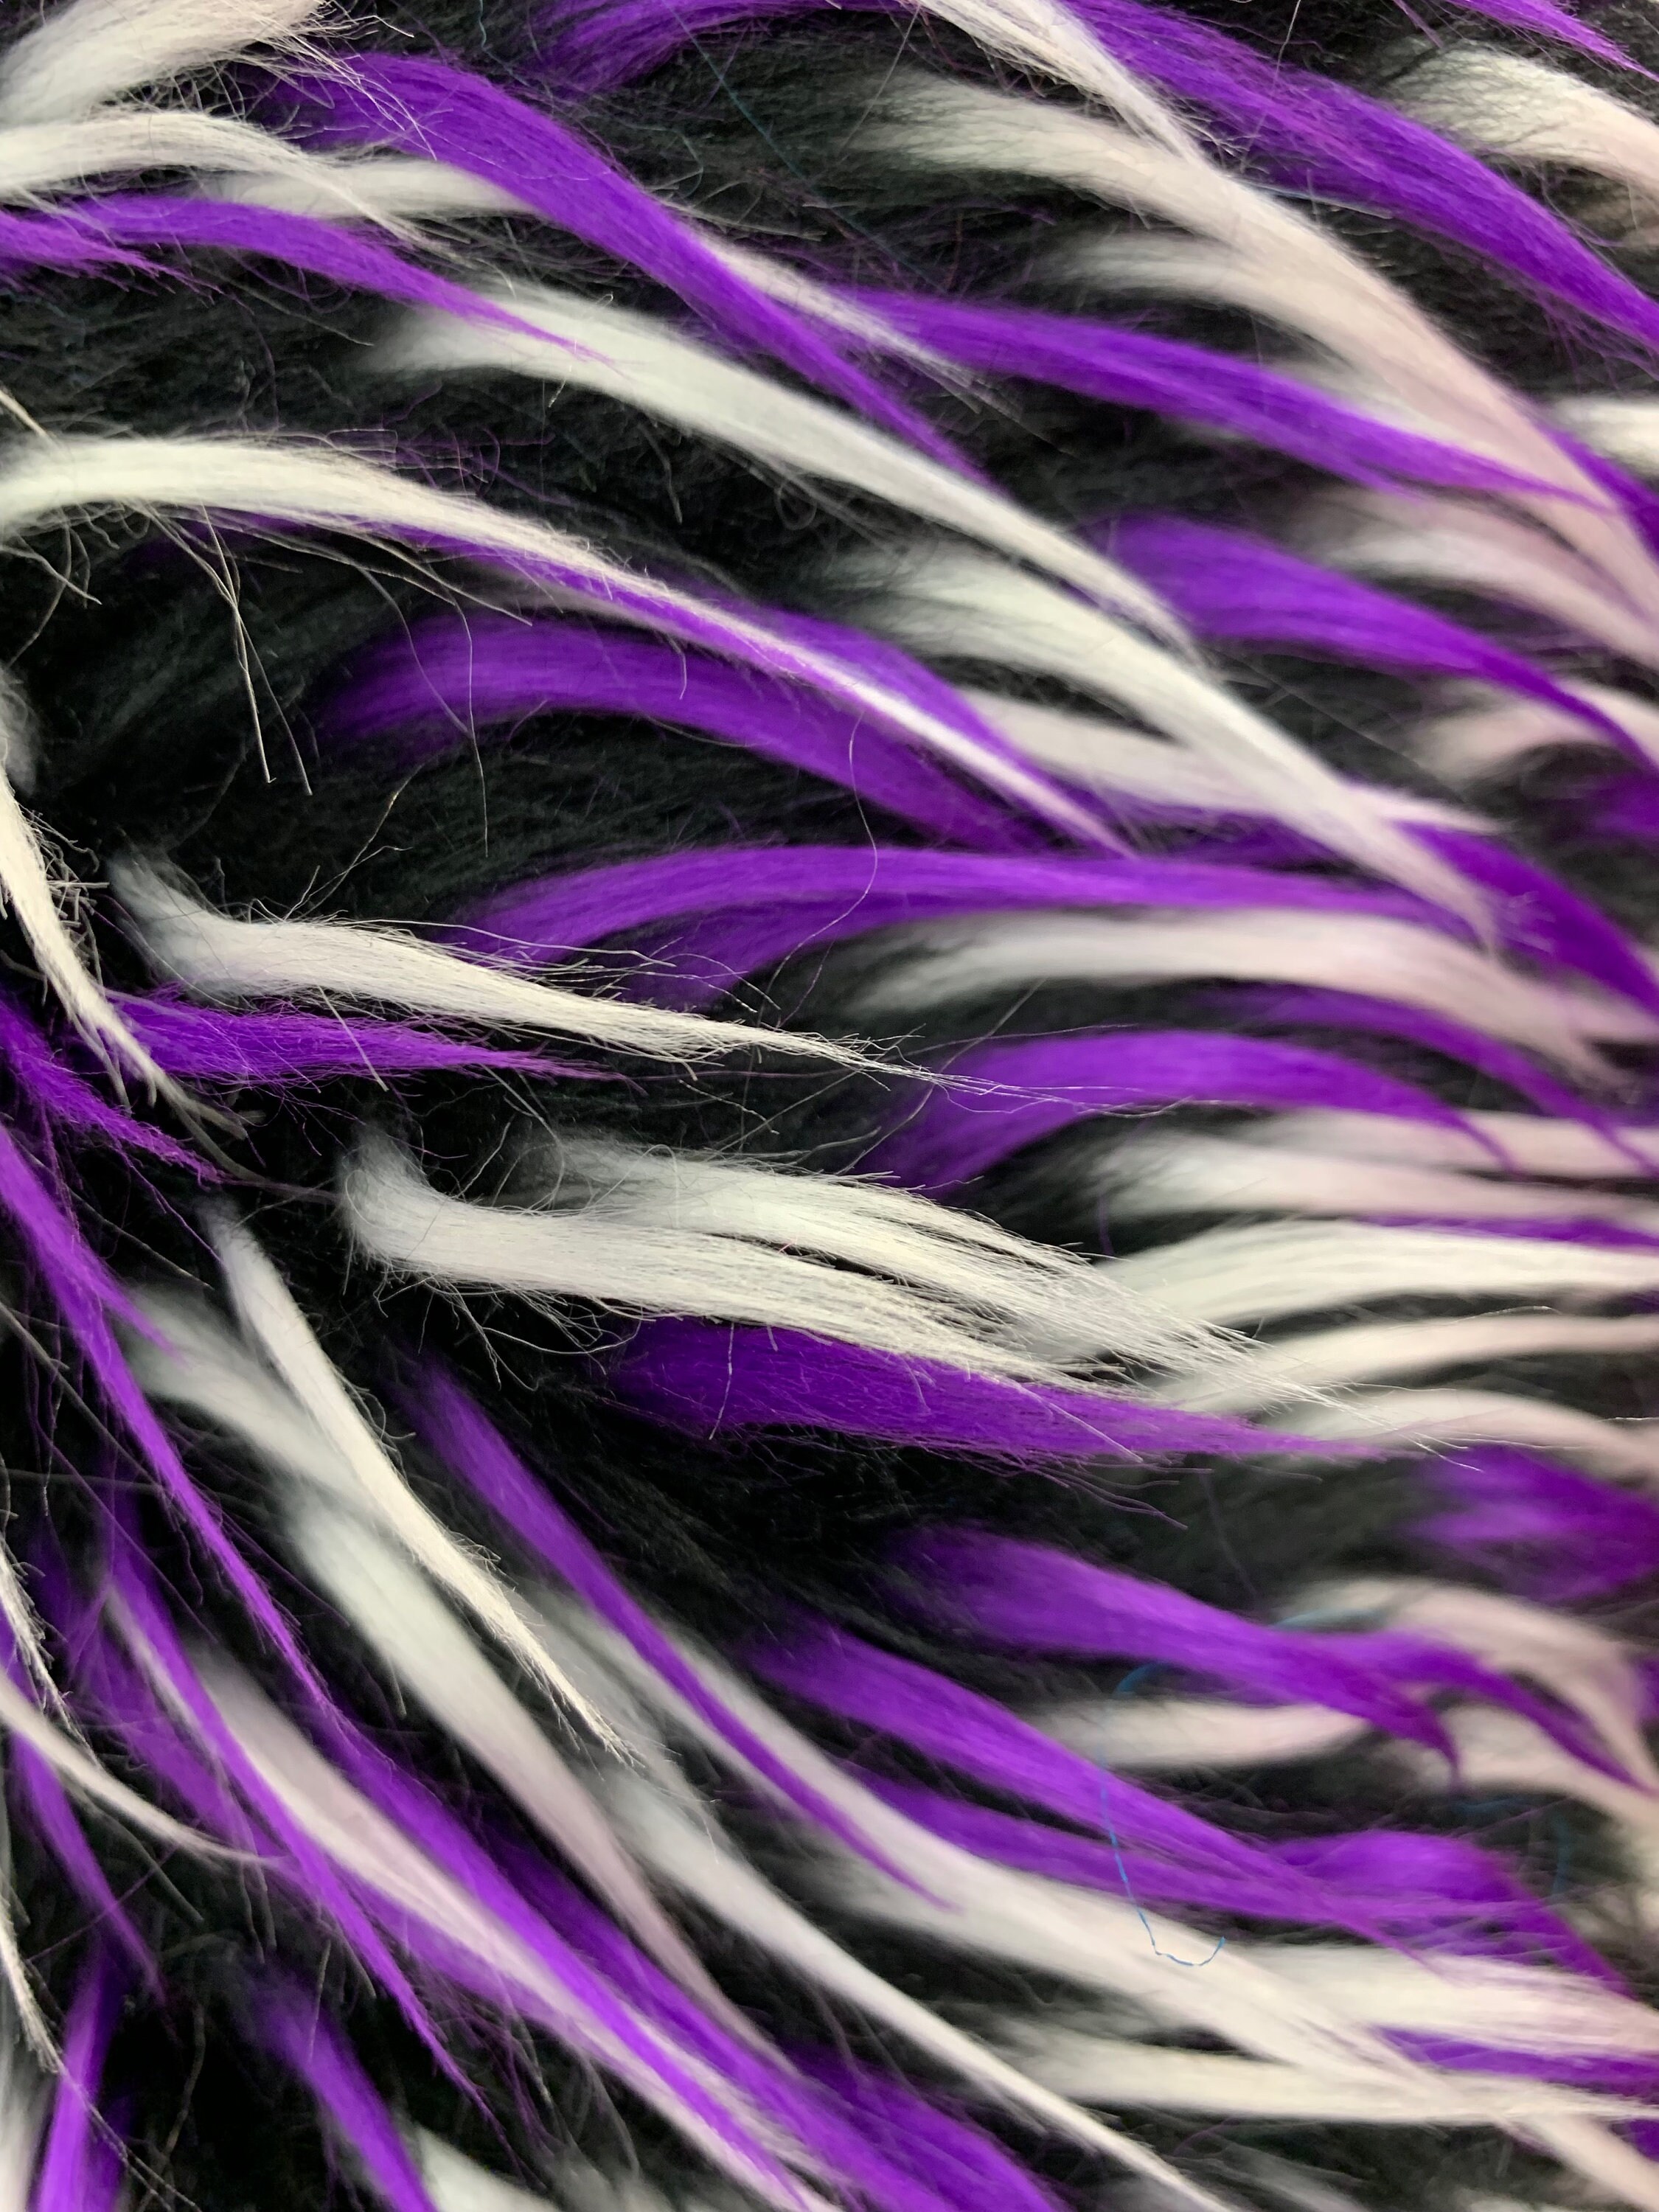 Polly BLACK WHITE PURPLE Spike Shaggy Soft Faux Fur Fabric for Fursuit,  Cosplay Costume, Photo Prop, Trim, Throw Pillow, Crafts -  Australia